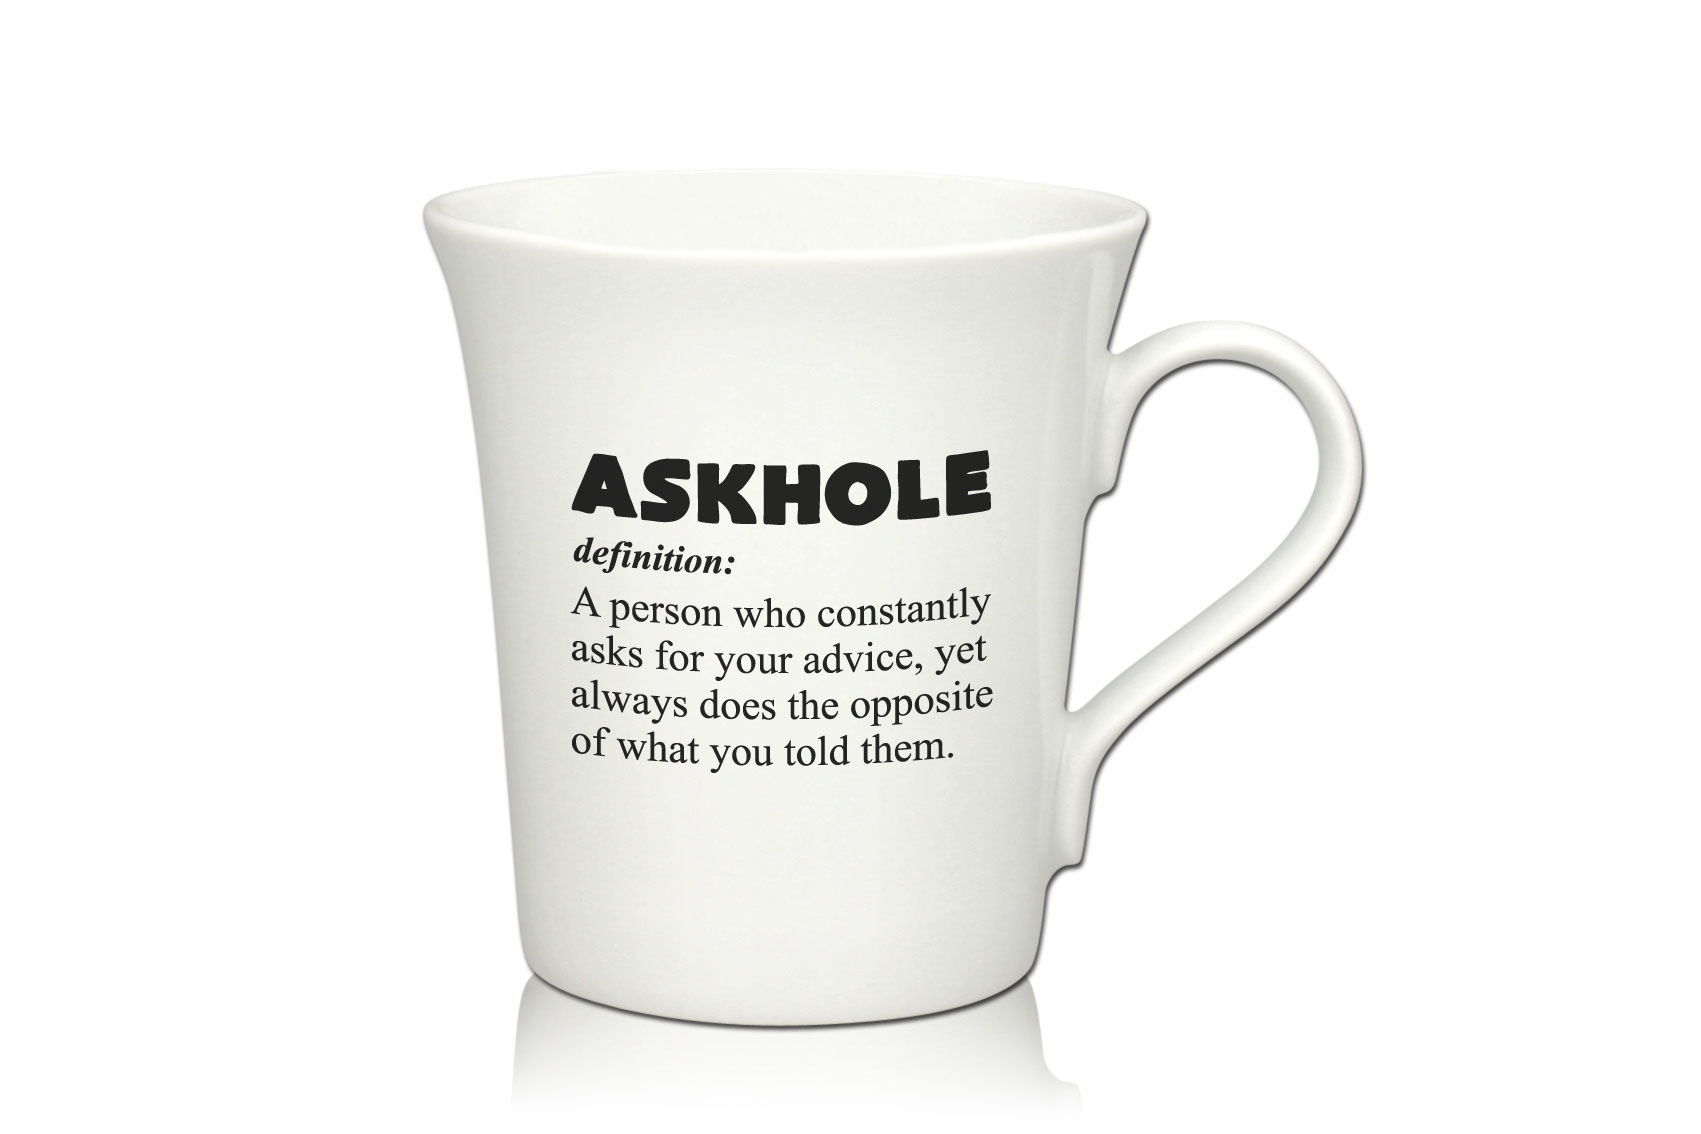 Lustige Porzellantasse Kaffeetasse Emilia weiss 34cl - Dekor: ASKHOLE definition: A person who constantly asks for your advice, yet always does the opposite of what you told them. von PorcelainSite GmbH